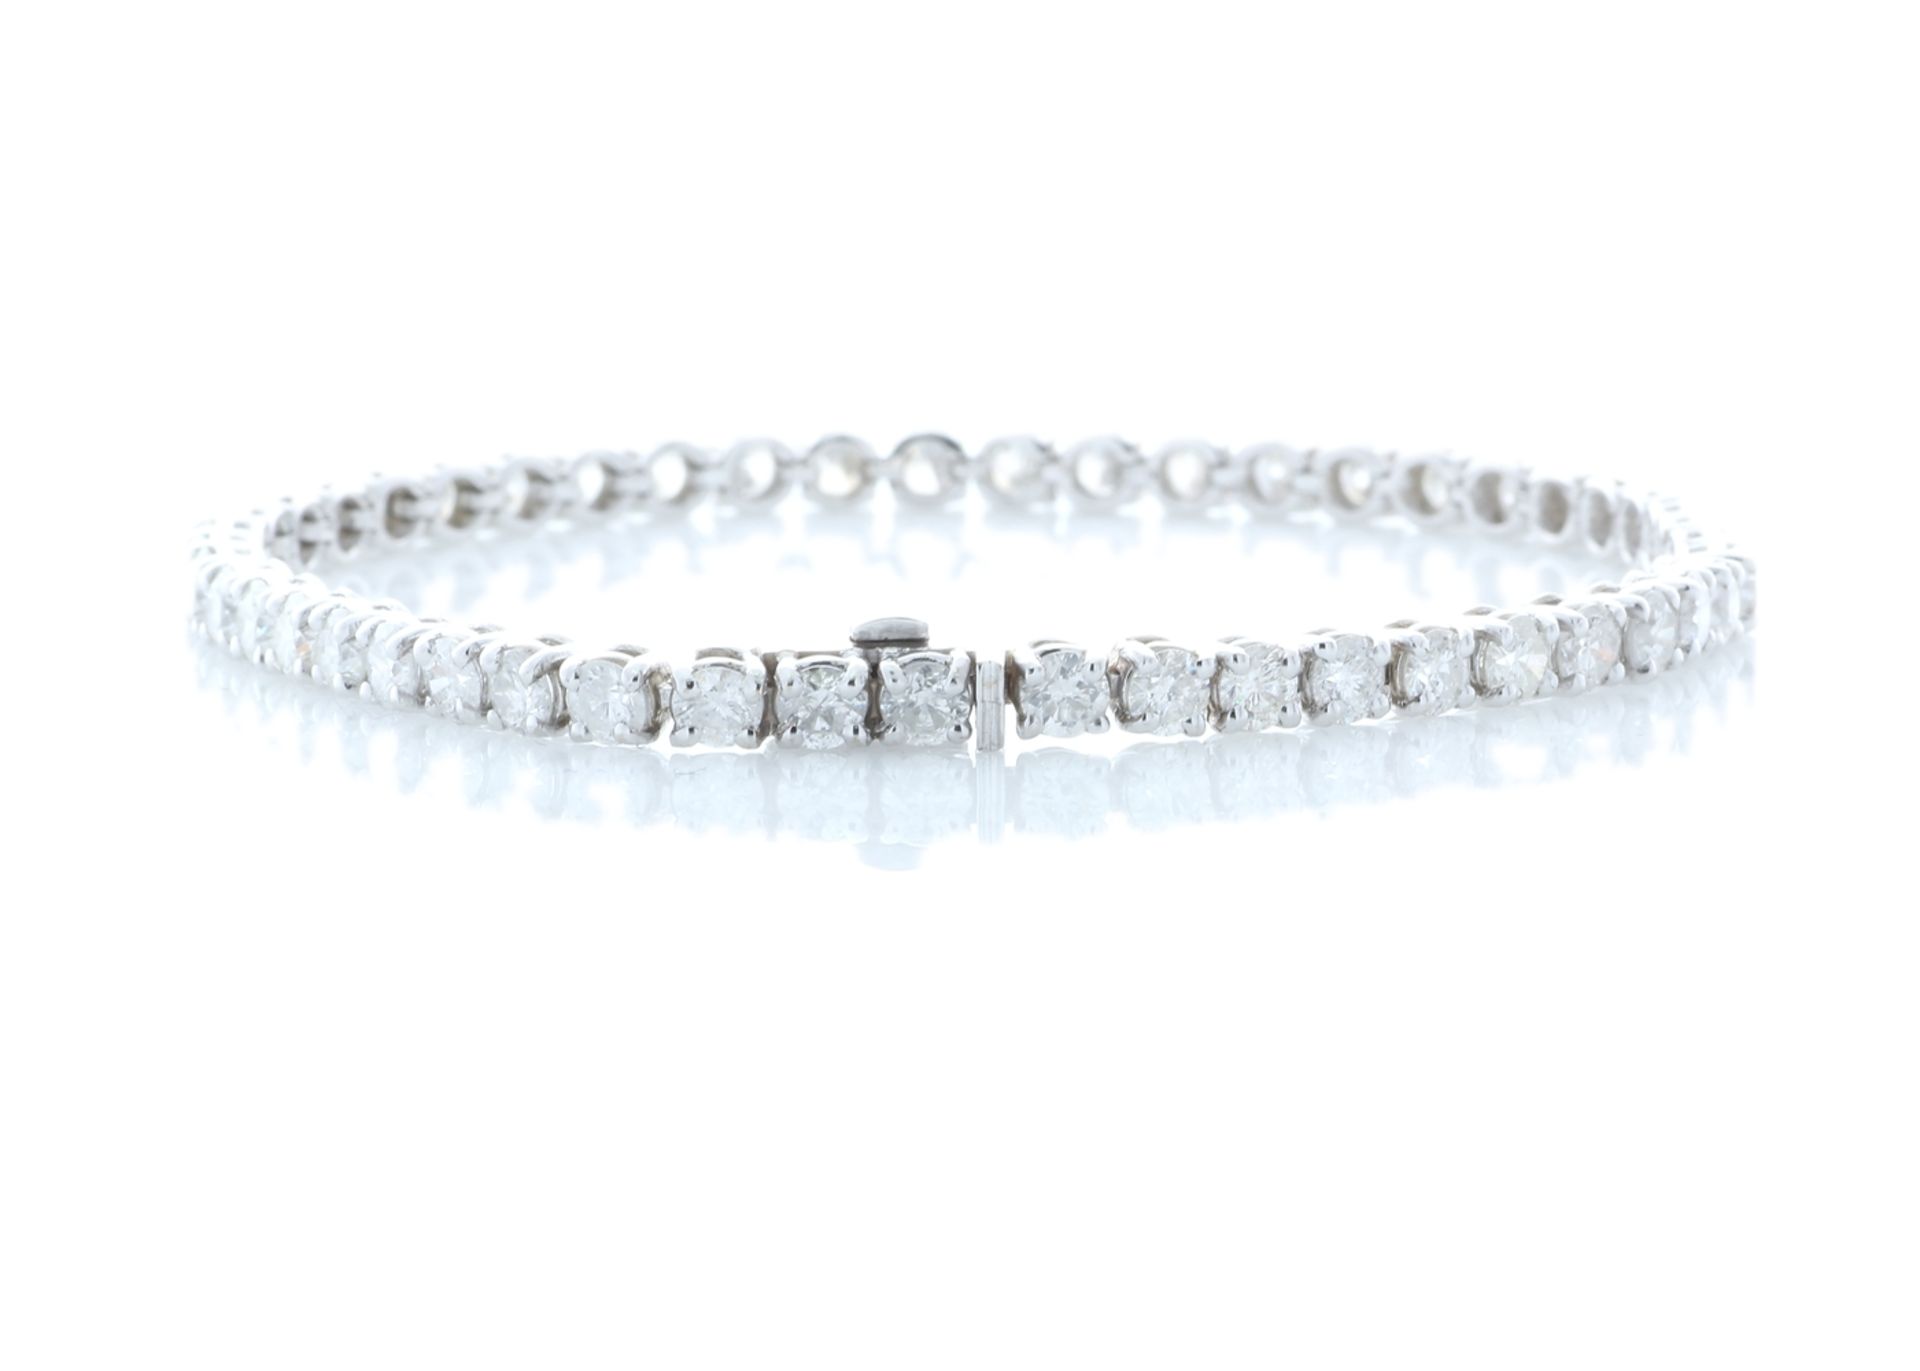 18ct White Gold Tennis Diamond Bracelet 7.67 Carats - Valued by GIE £39,995.00 - 18ct White Gold - Image 3 of 4